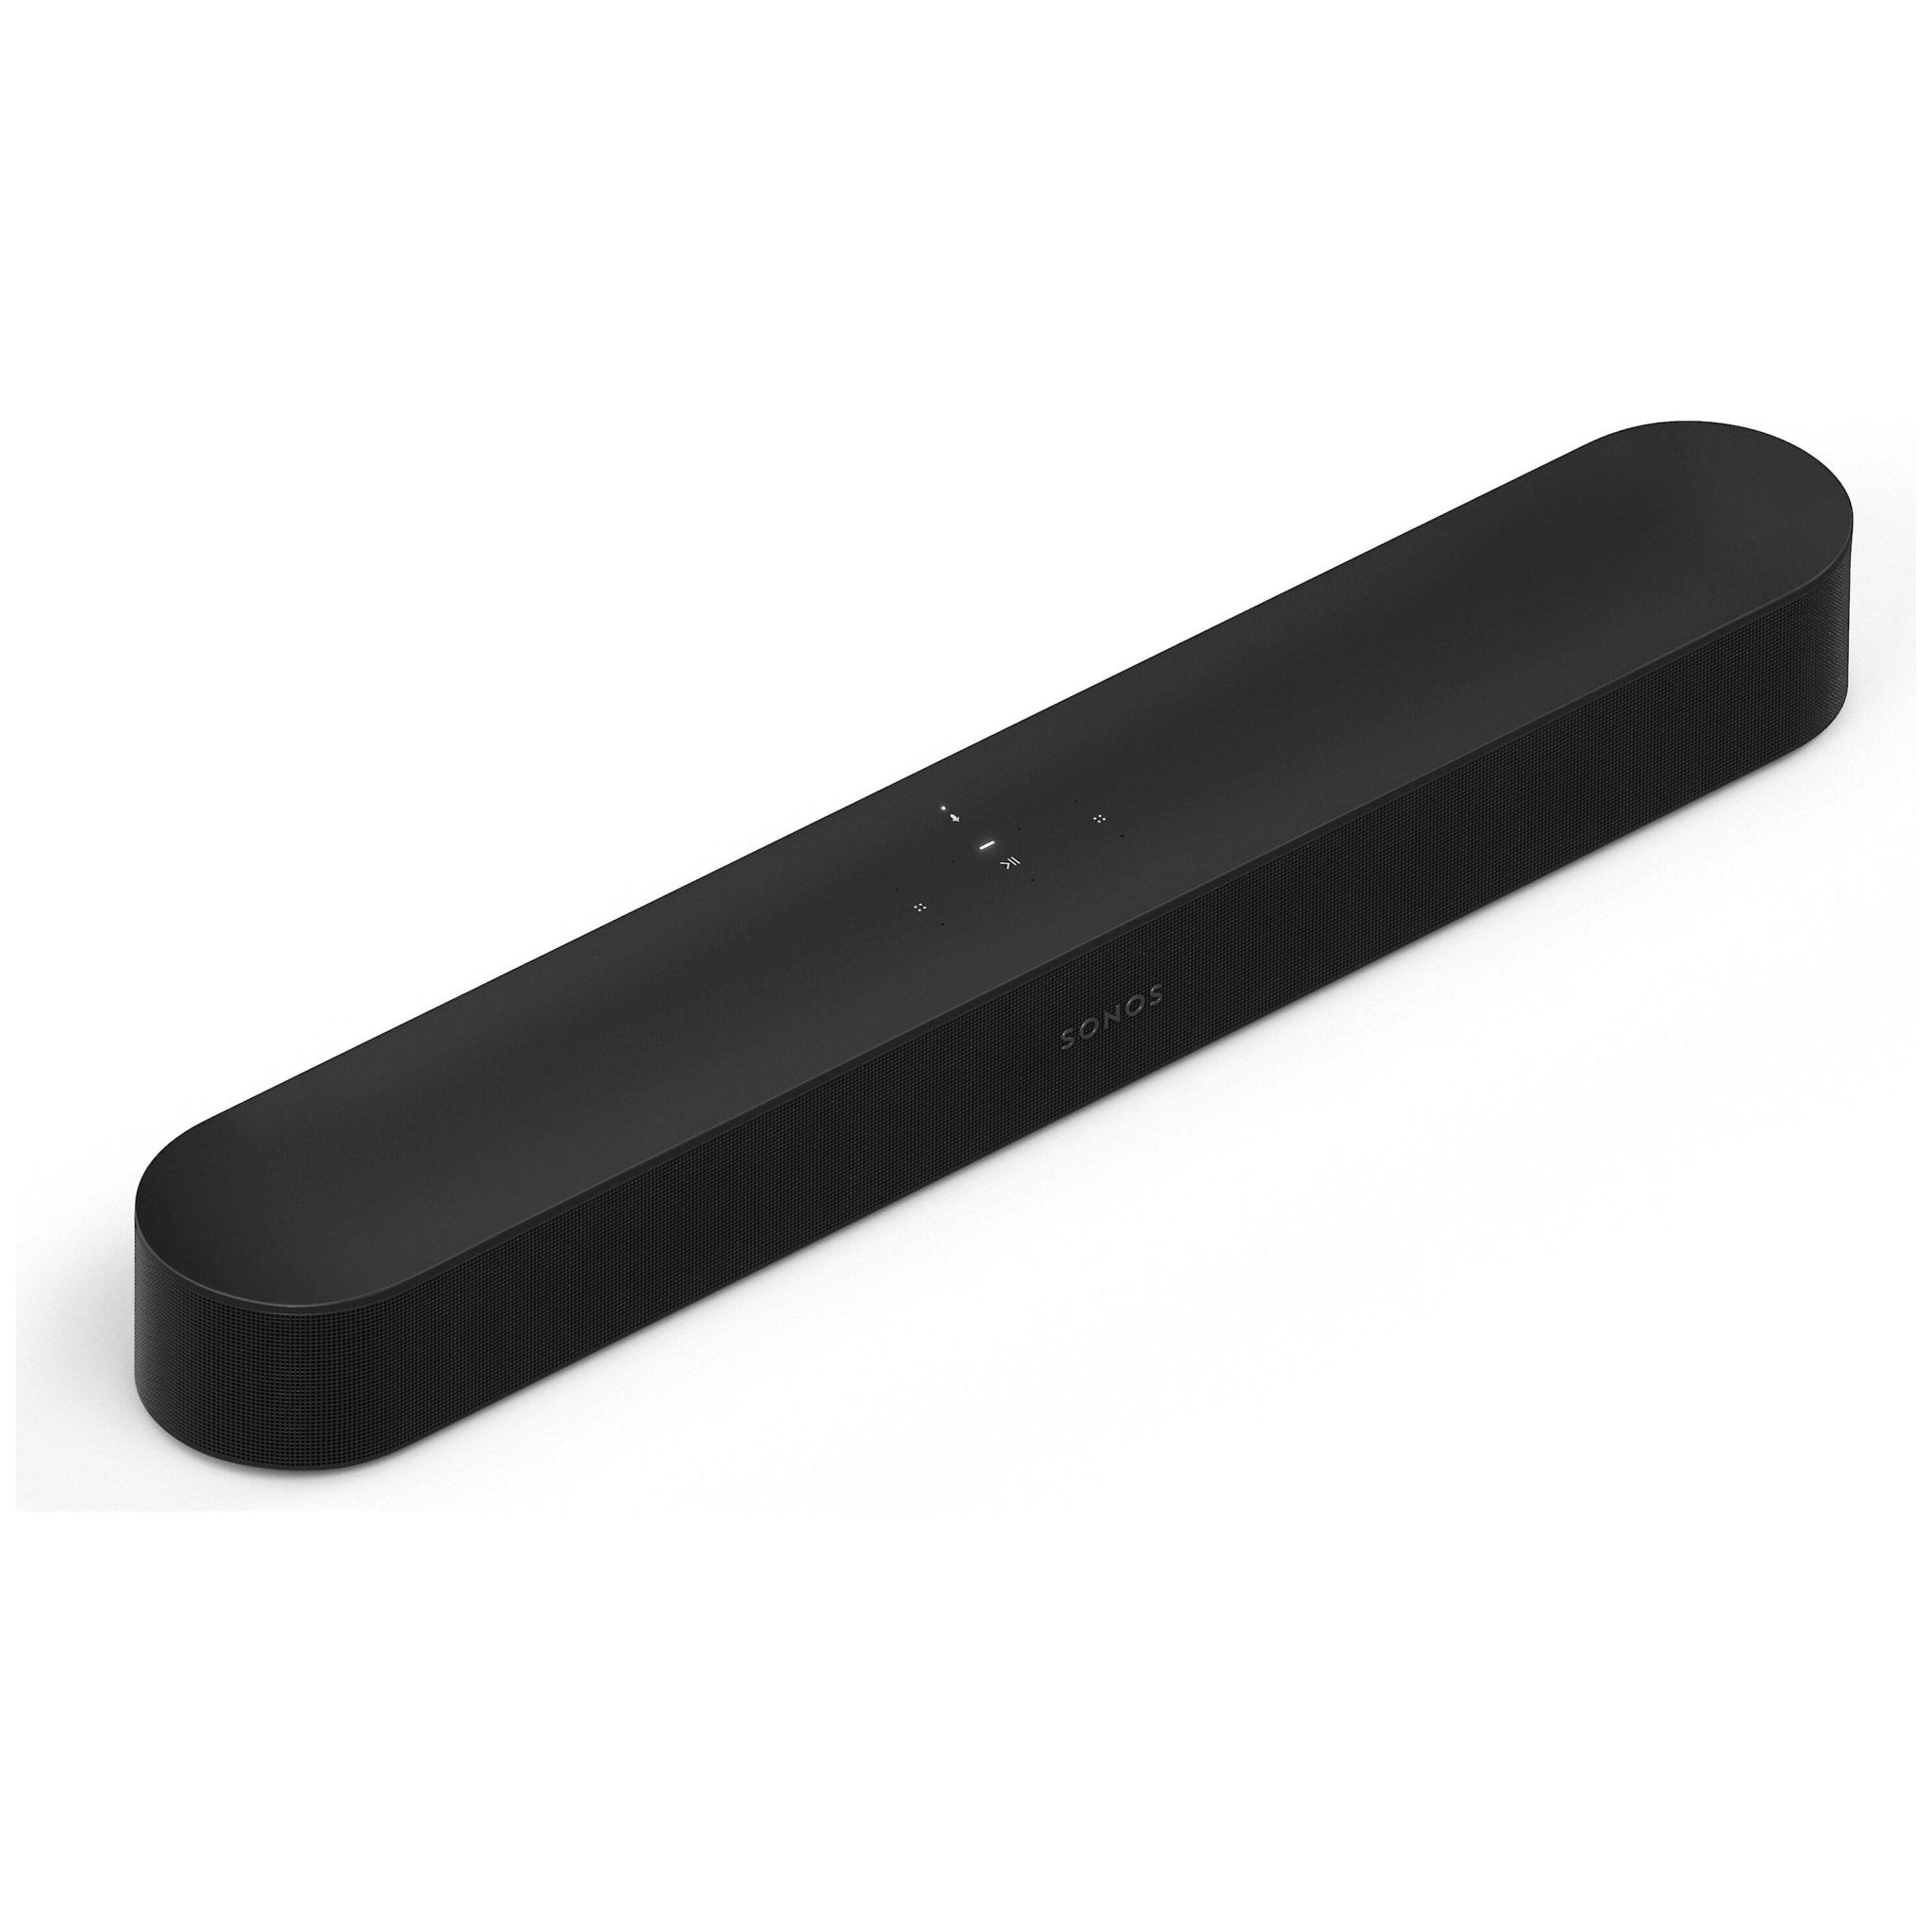 Sonos Beam (Gen 2) review: What is this incredible soundbar wizardry?